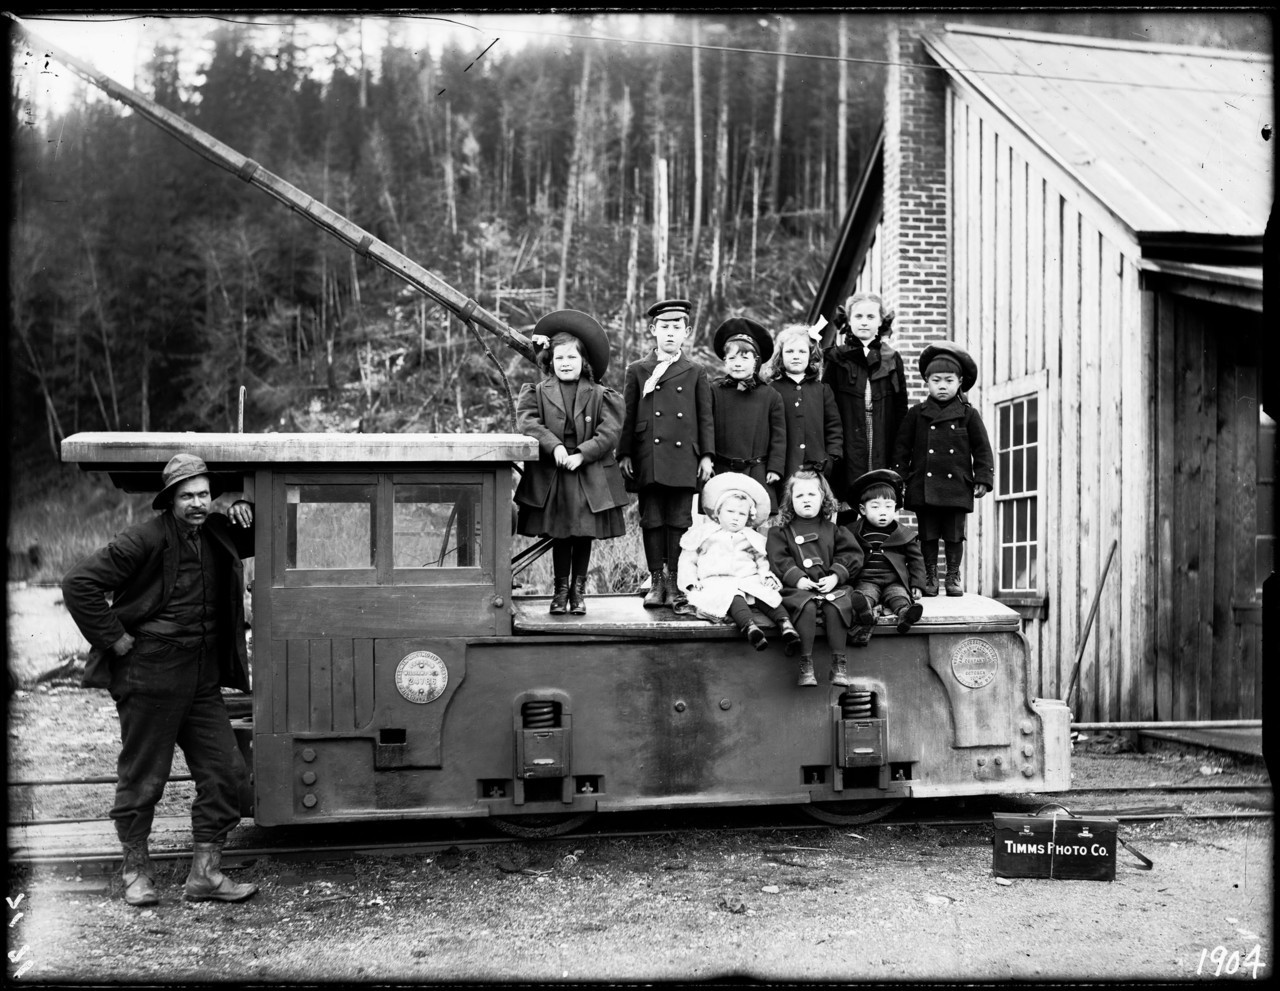 Group of children on top of a locomotive at Britannia Mine.
1904
Source: Vancouver Public Library